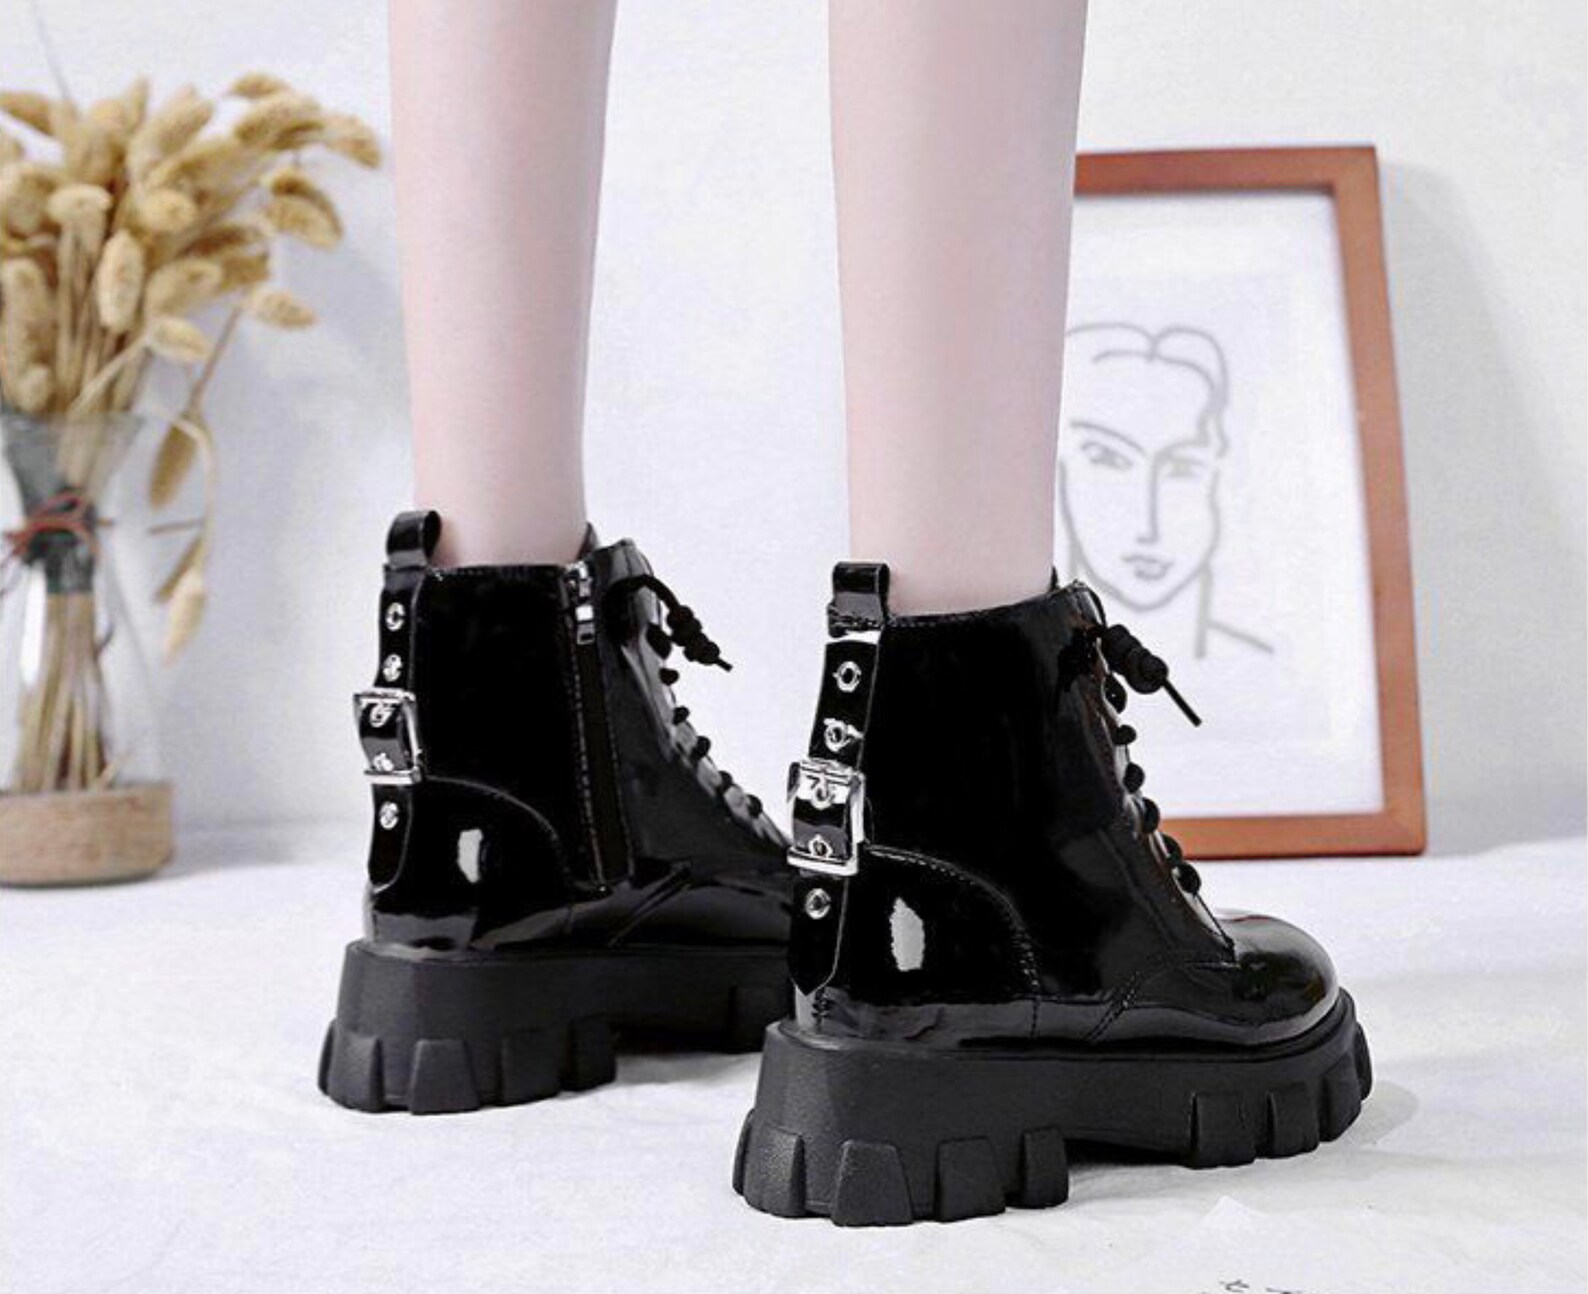 Anime Lolita Black Shiny or Matte Platform Boots With Buckle | Etsy